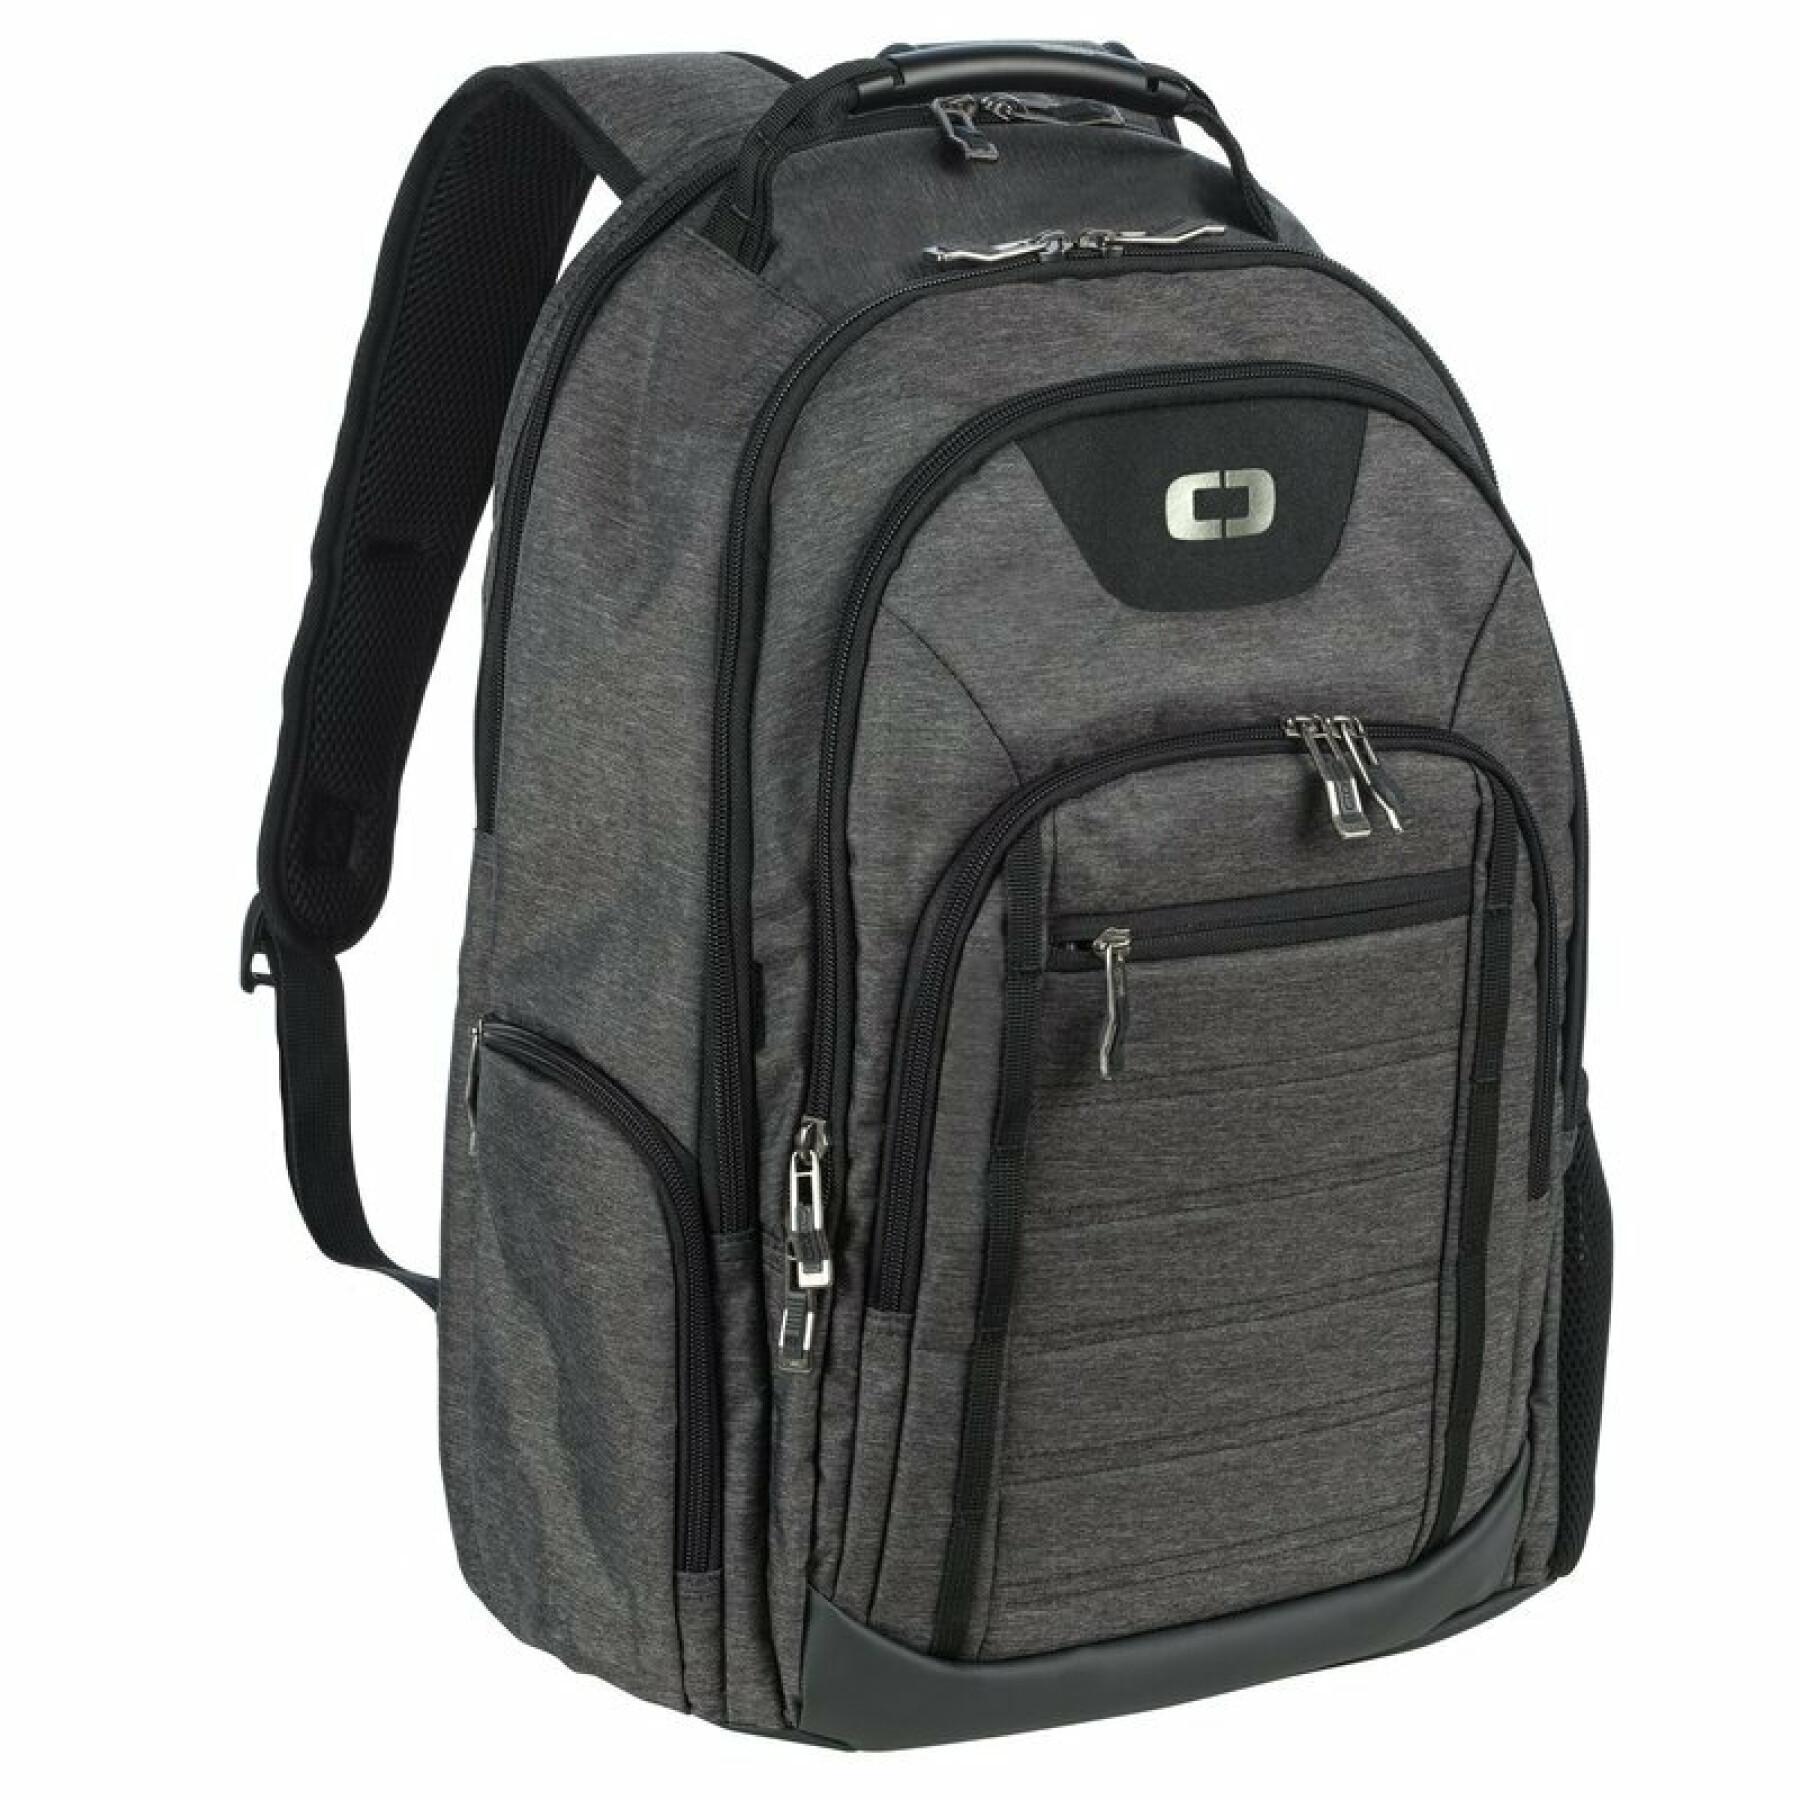 Motorcycle backpack Ogio OGIO Difter - Dark Static